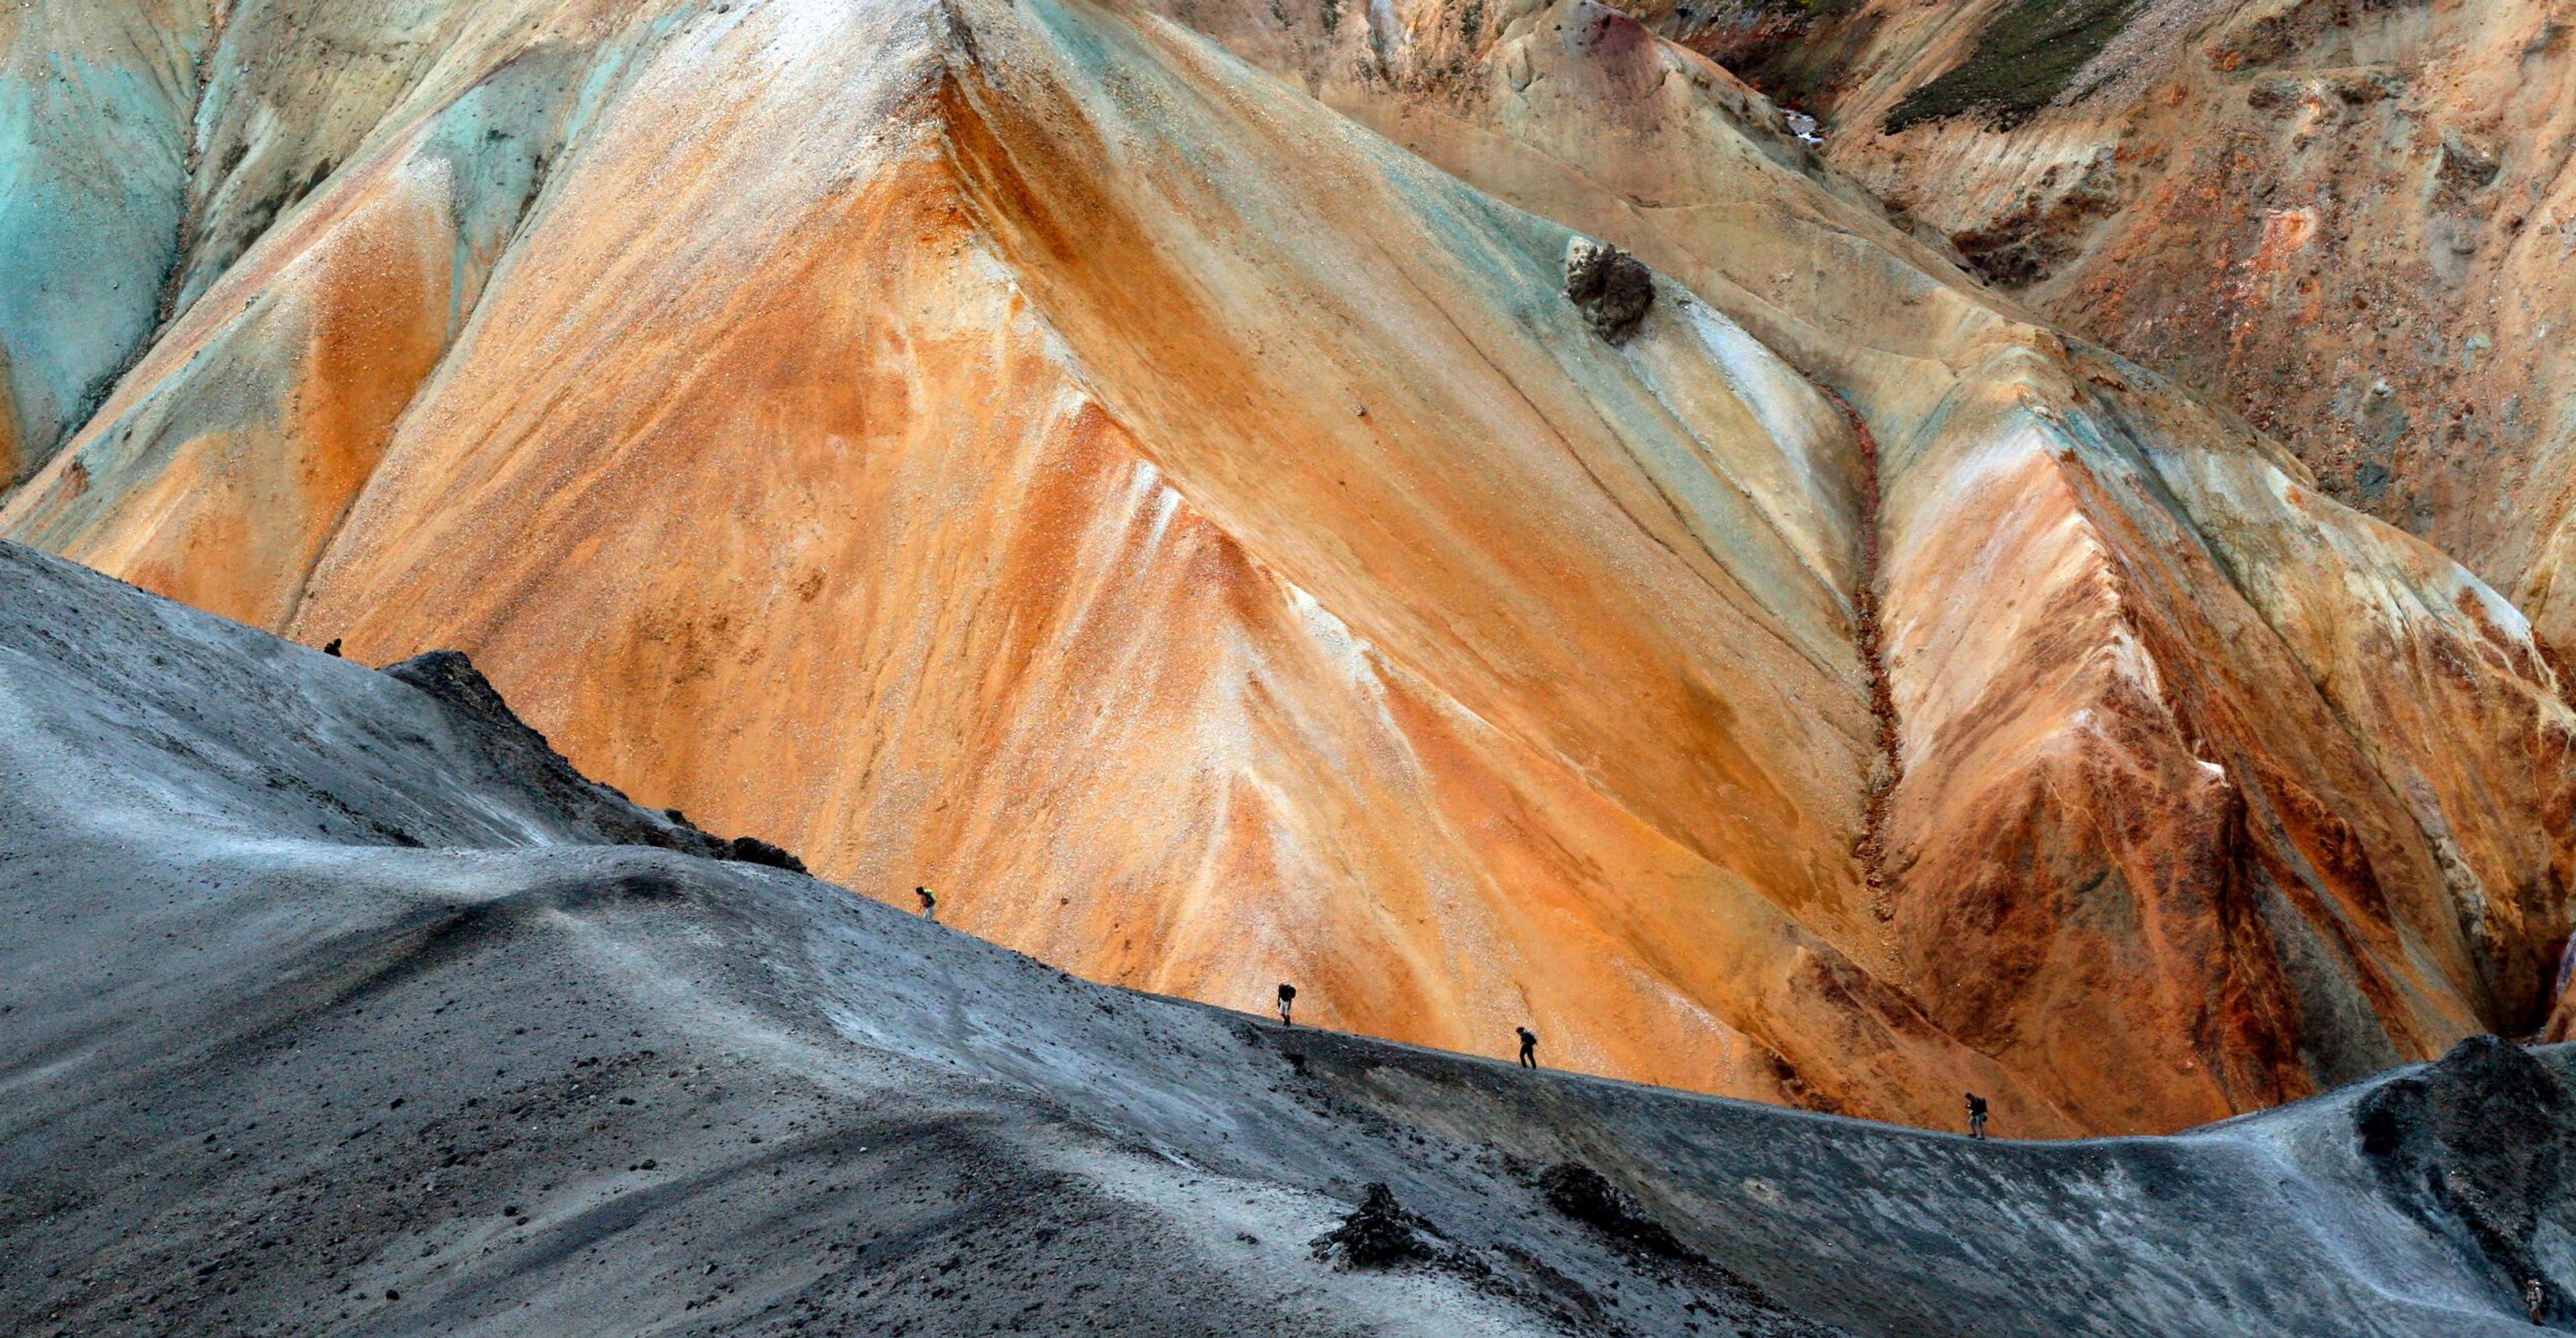 Colorful rock formation in the icelandic Highlands.